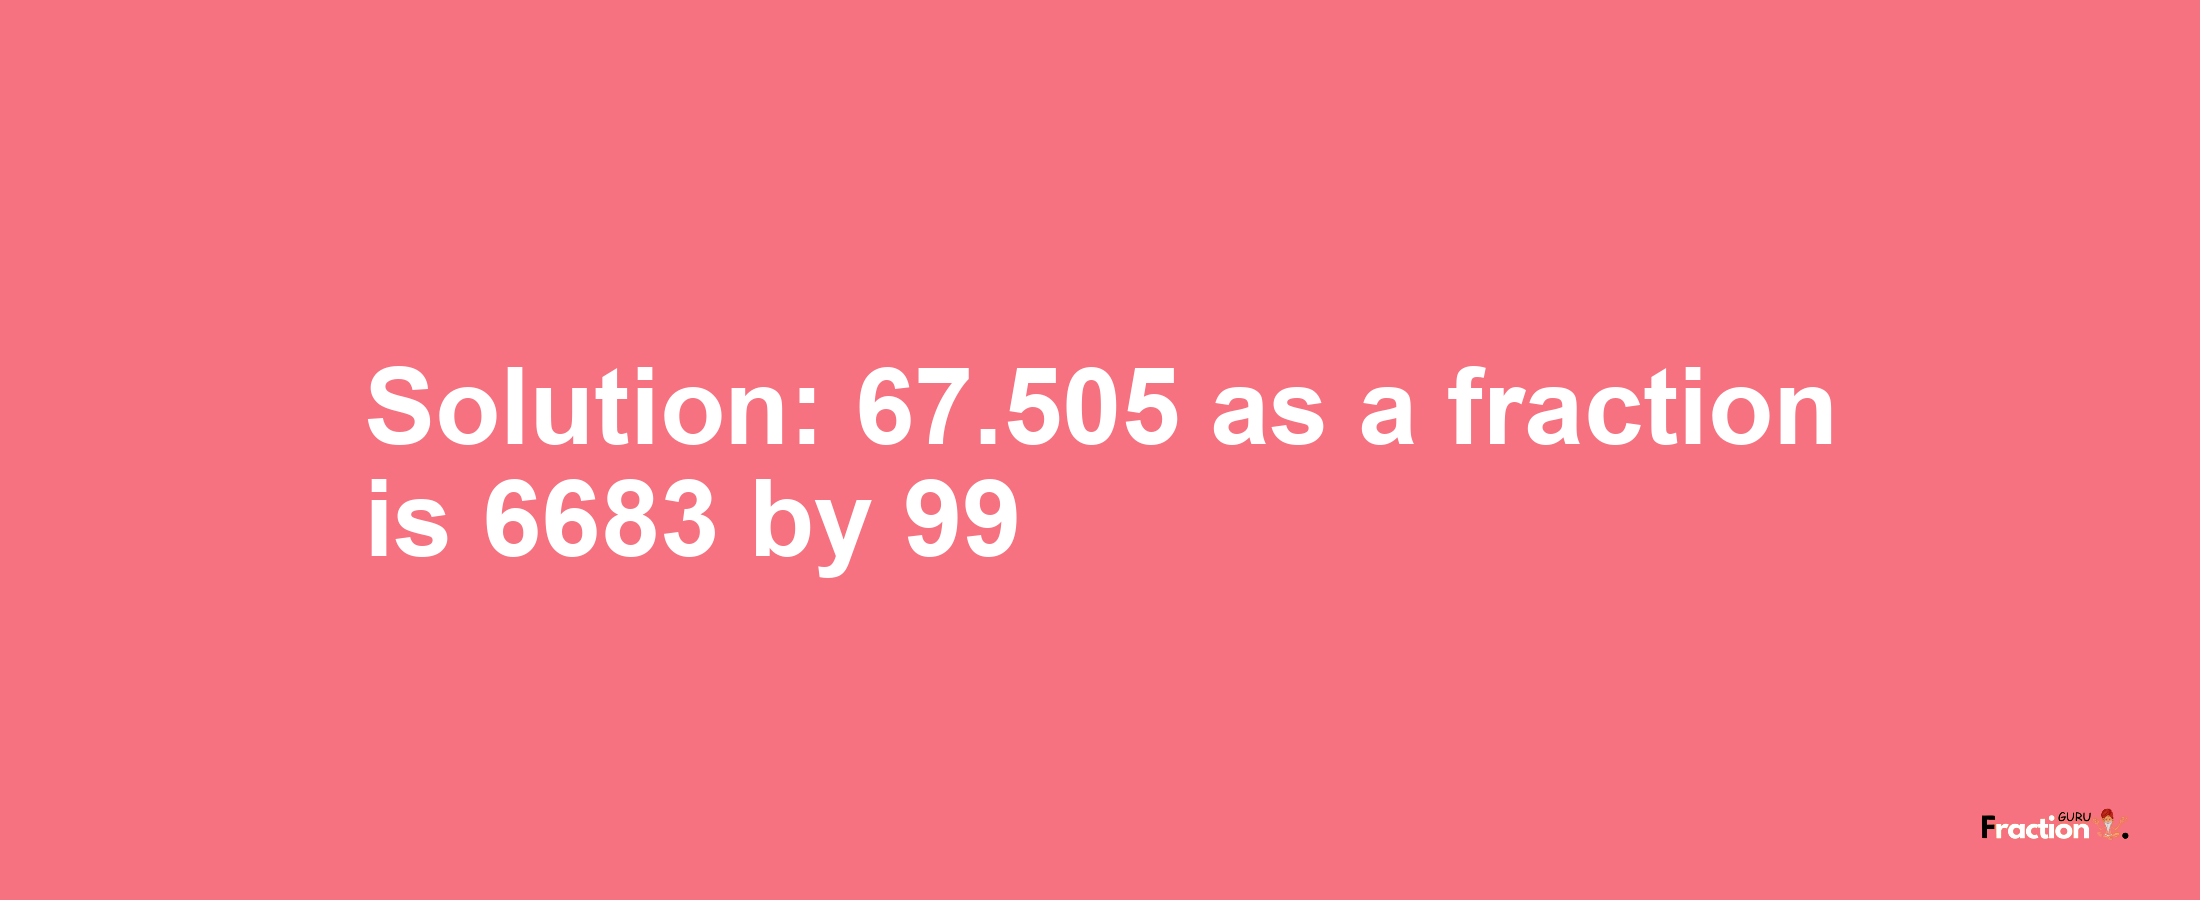 Solution:67.505 as a fraction is 6683/99